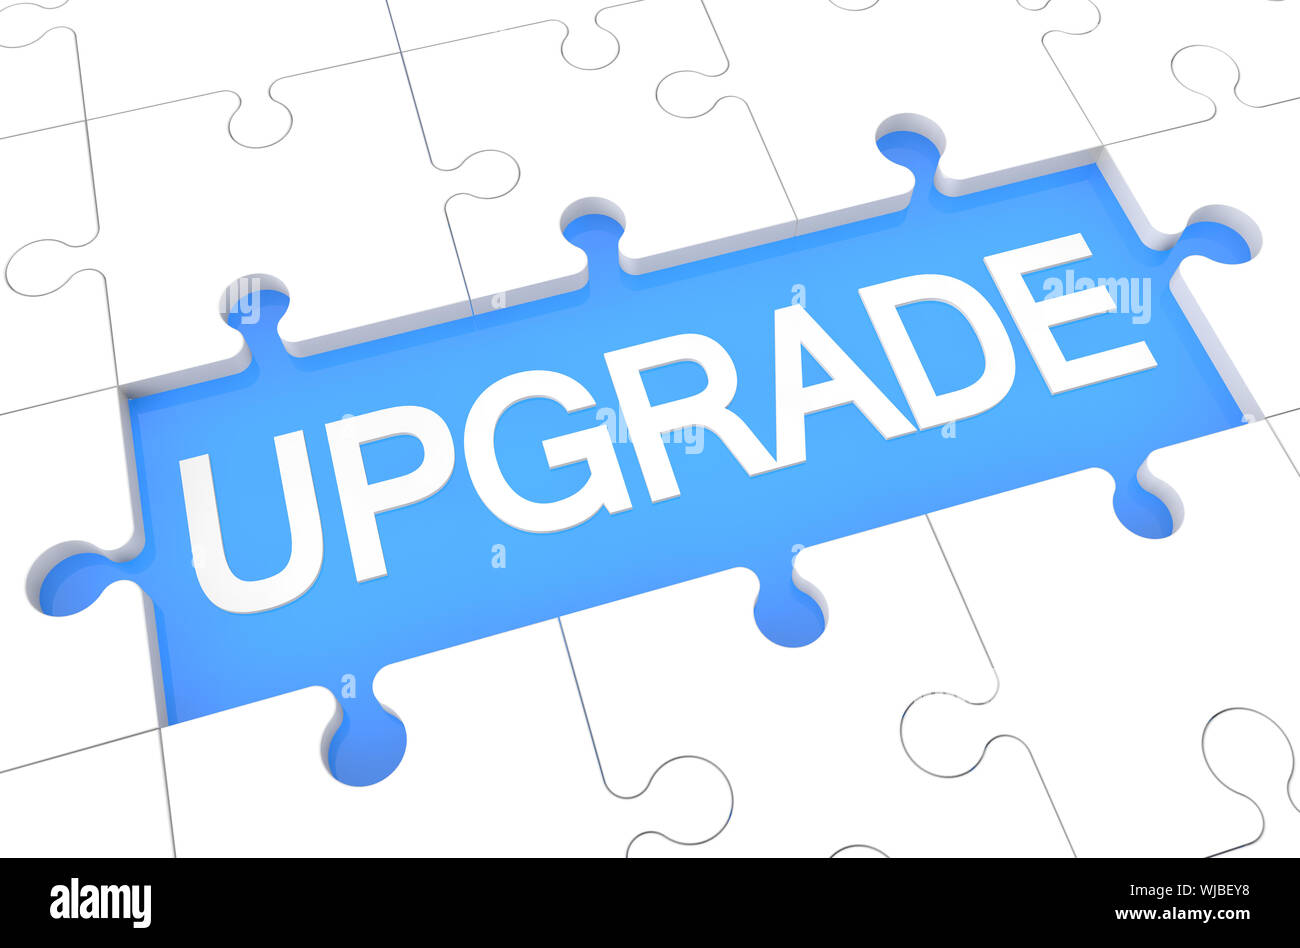 Upgrade - puzzle 3d render illustration with word on blue background Stock Photo